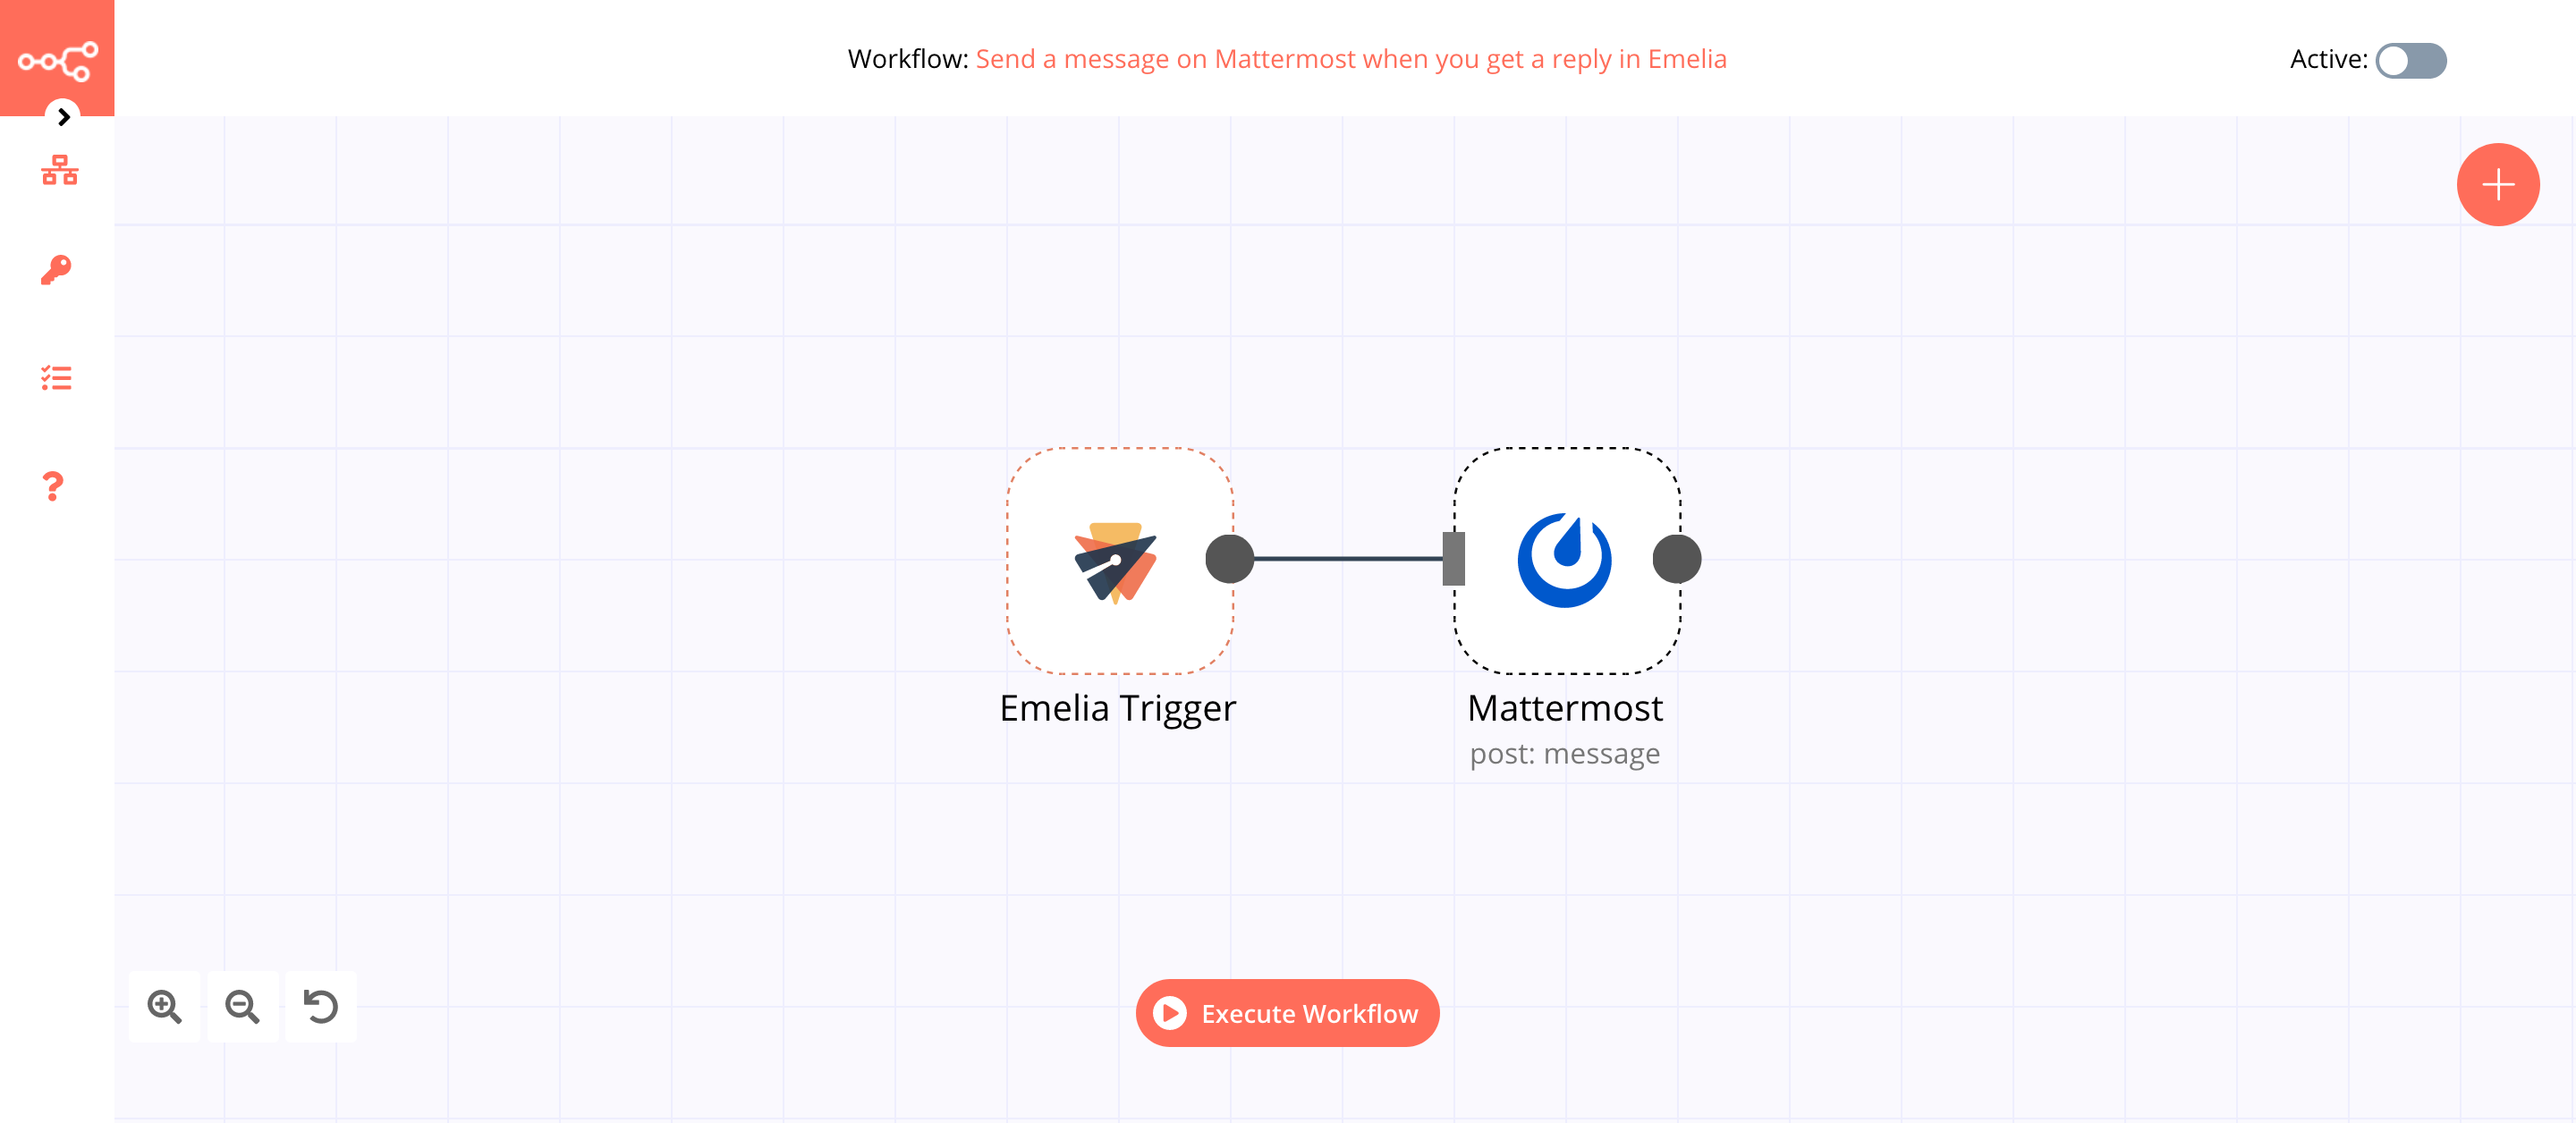 A workflow with the Emelia Trigger node